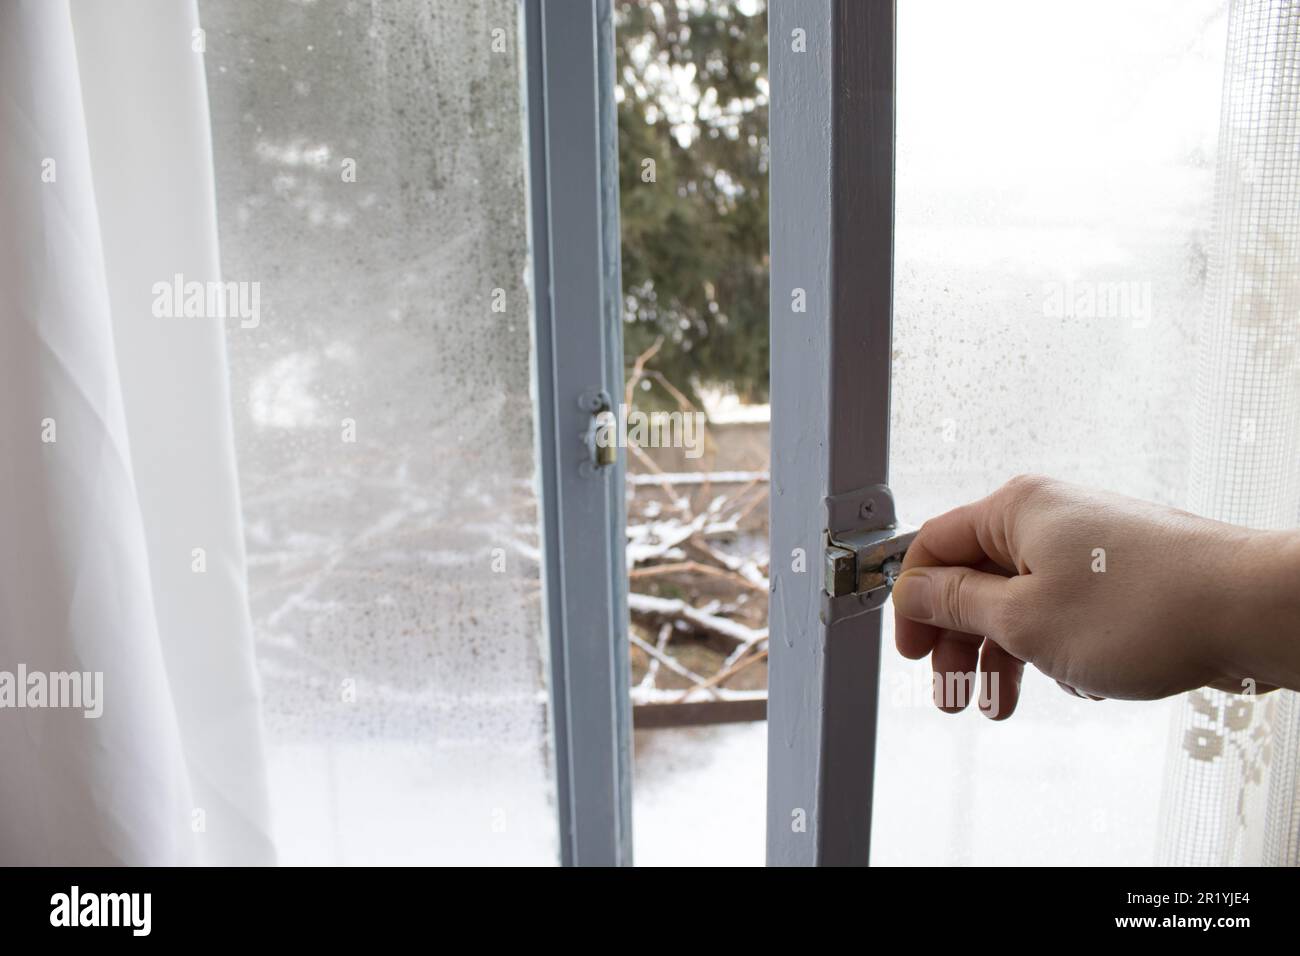 The misty window that opens into the snow-covered garden. Stock Photo